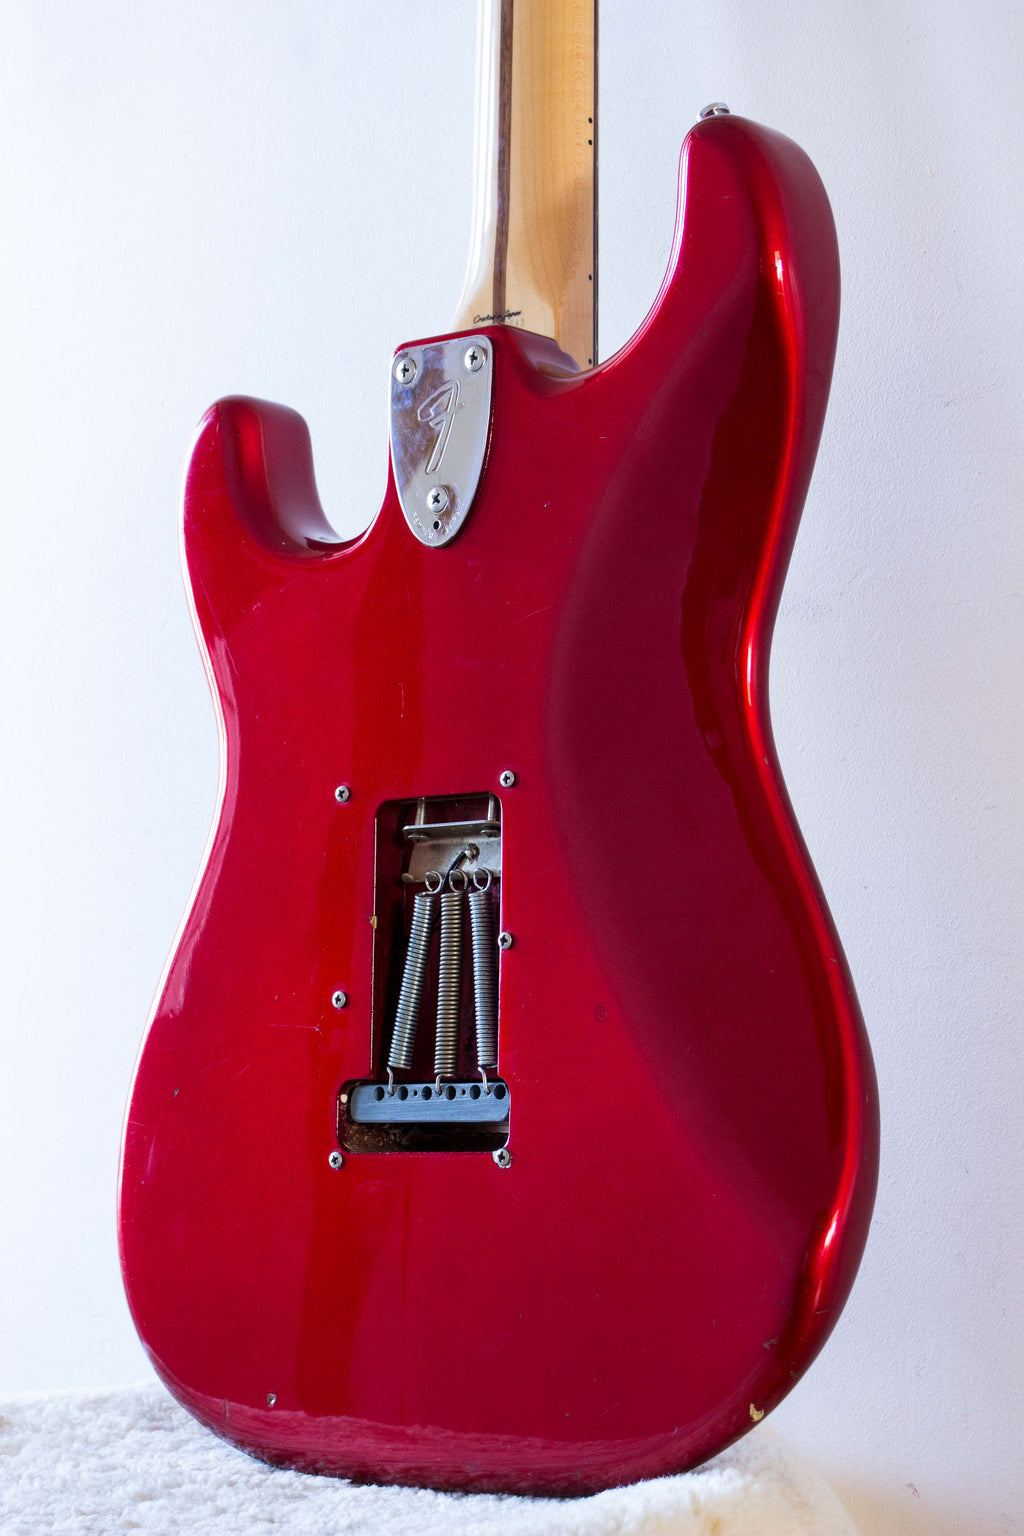 Fender Japan '71 Stratocaster ST71-85TX Candy Apple Red 2000